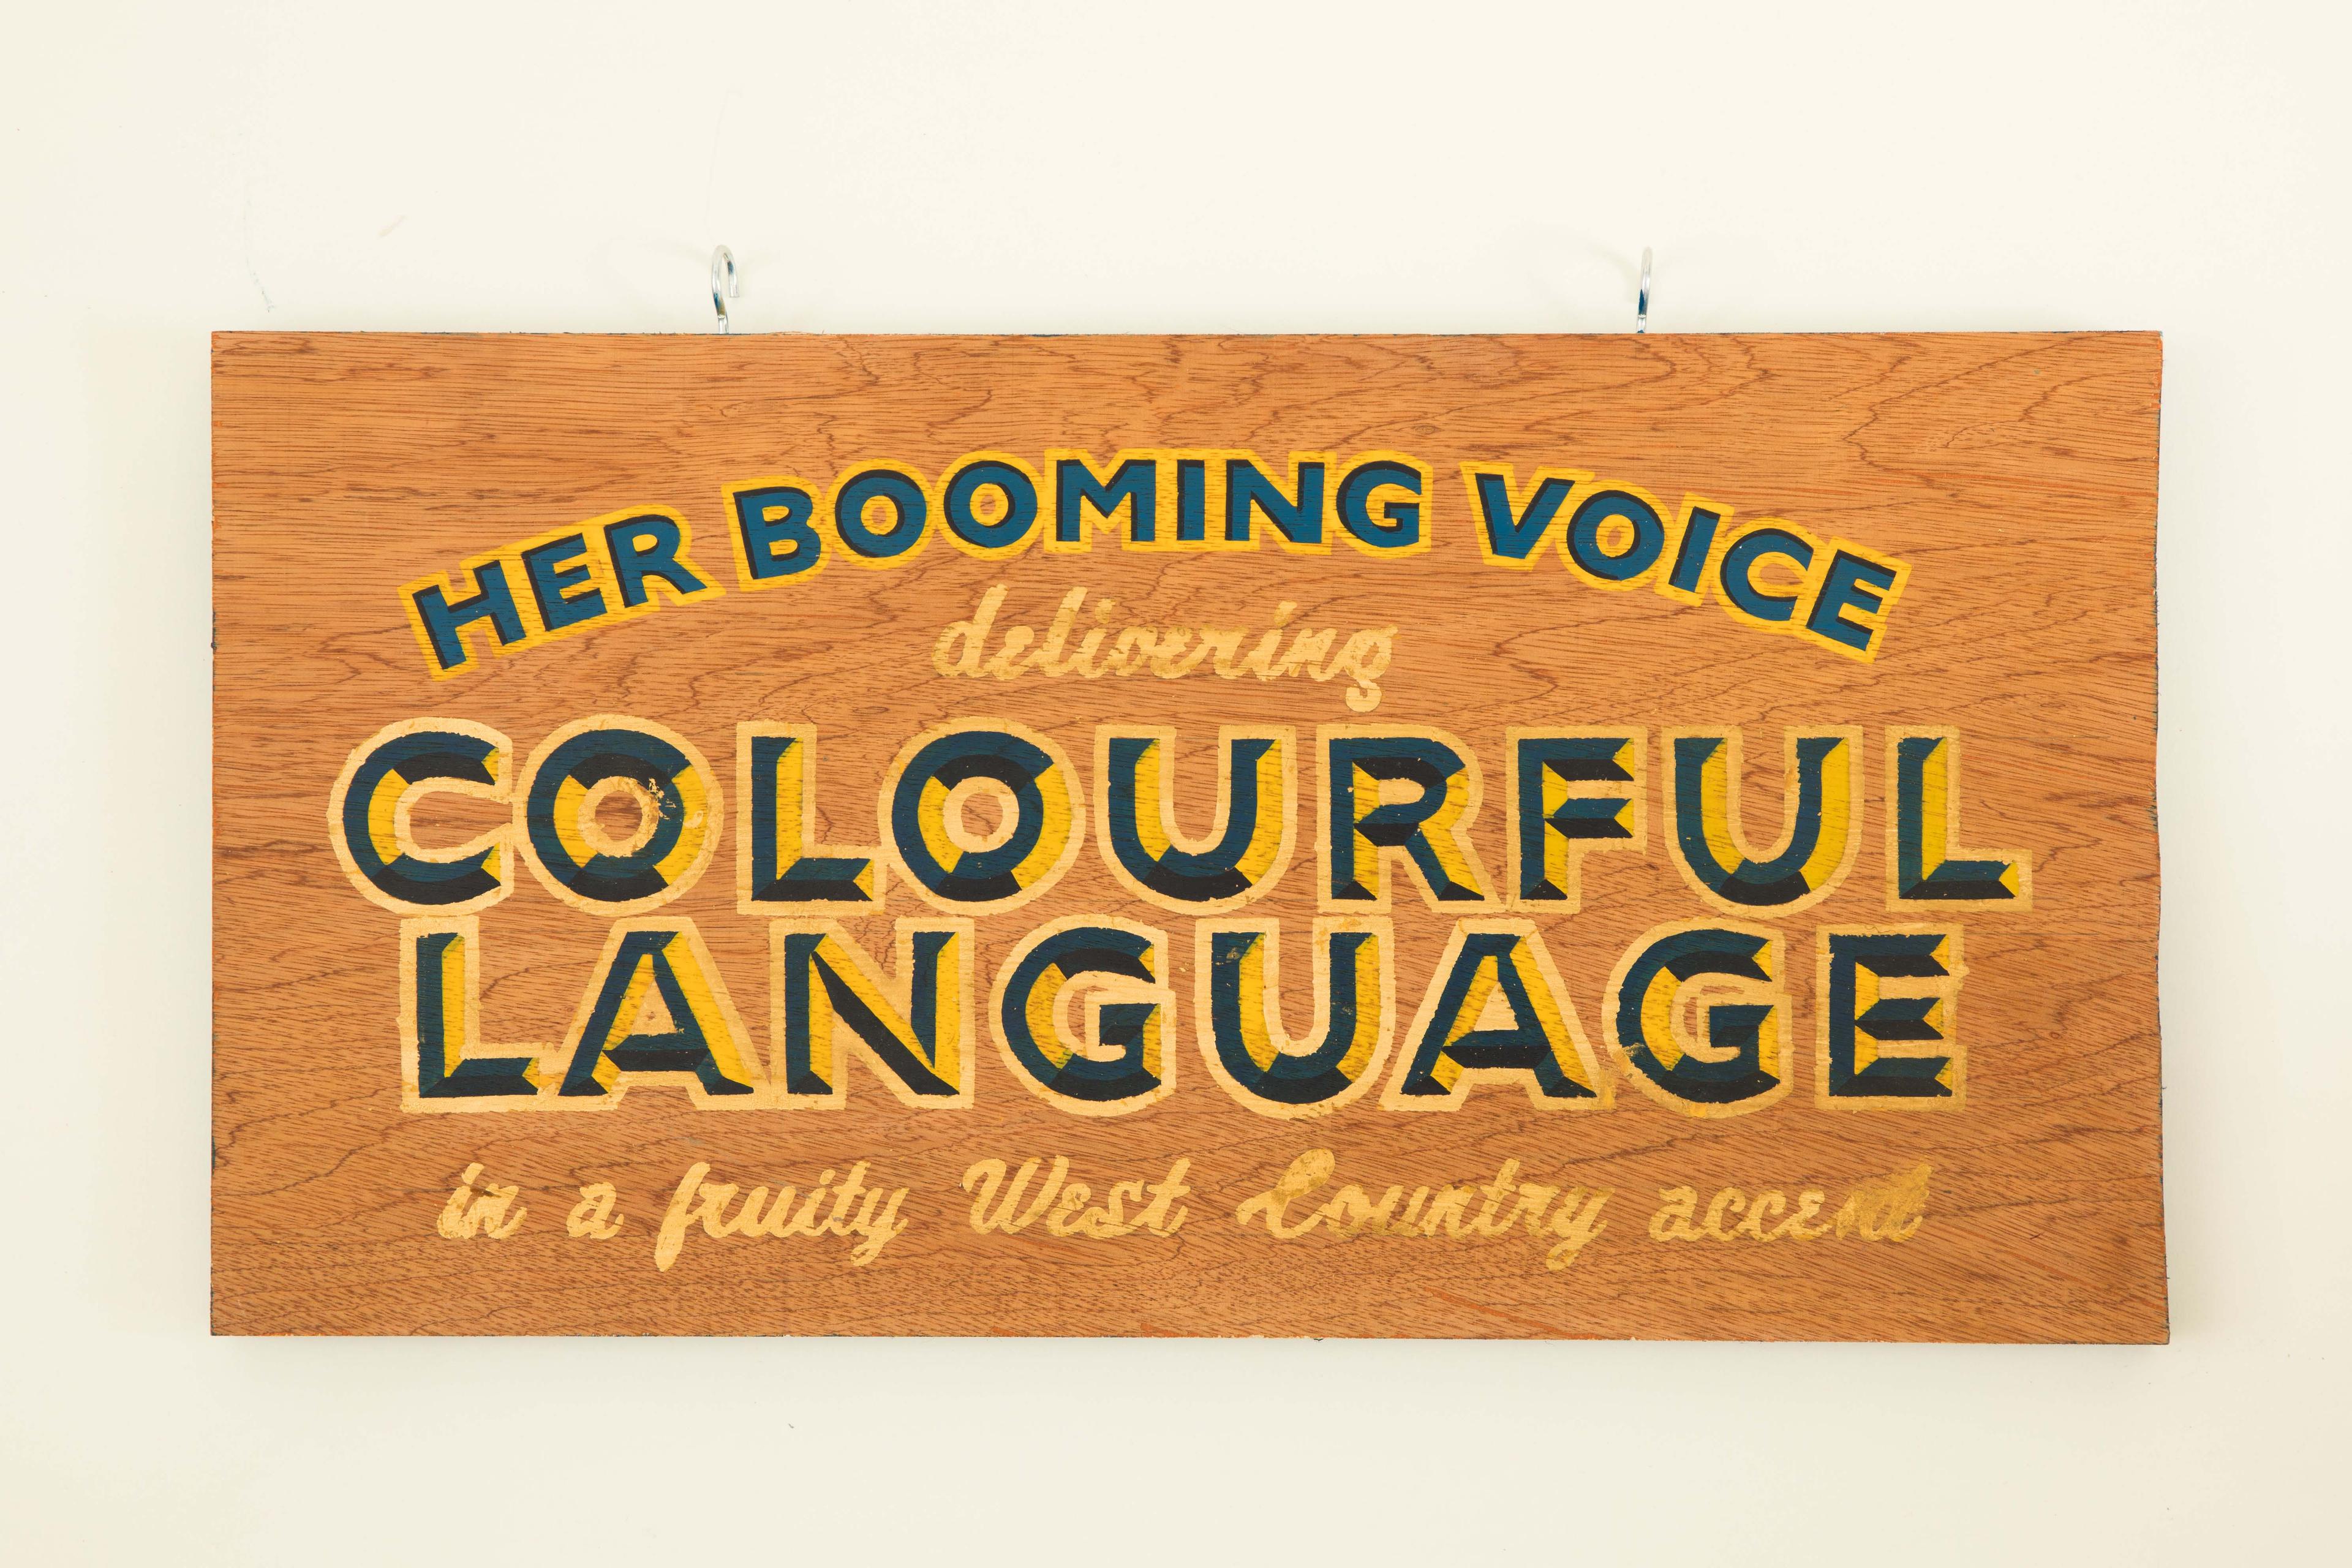 A fairground sign with the bold text: her booming voice delivering colourful language in a fruity west country accent.